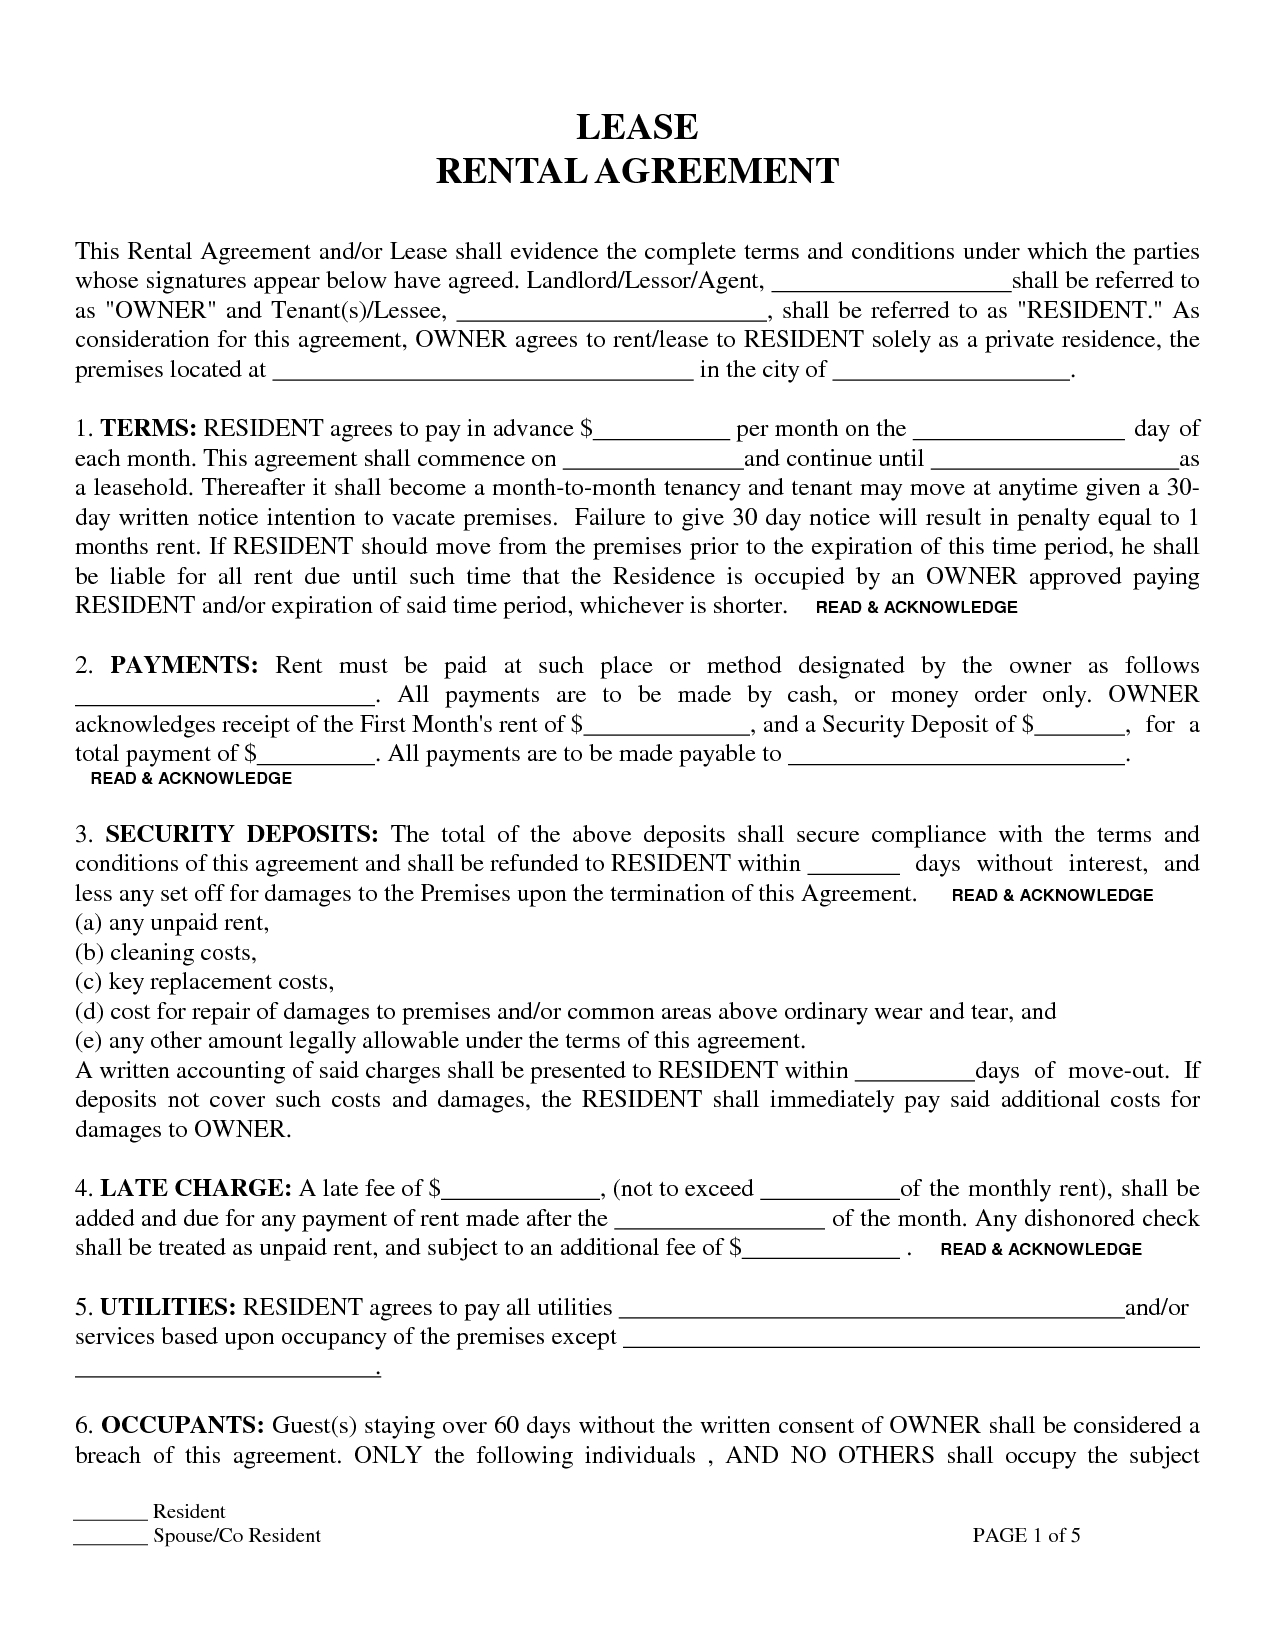 Printable Sample Residential Lease Form  Laywers Template Forms intended for Free Printable Residential Lease Agreement Template